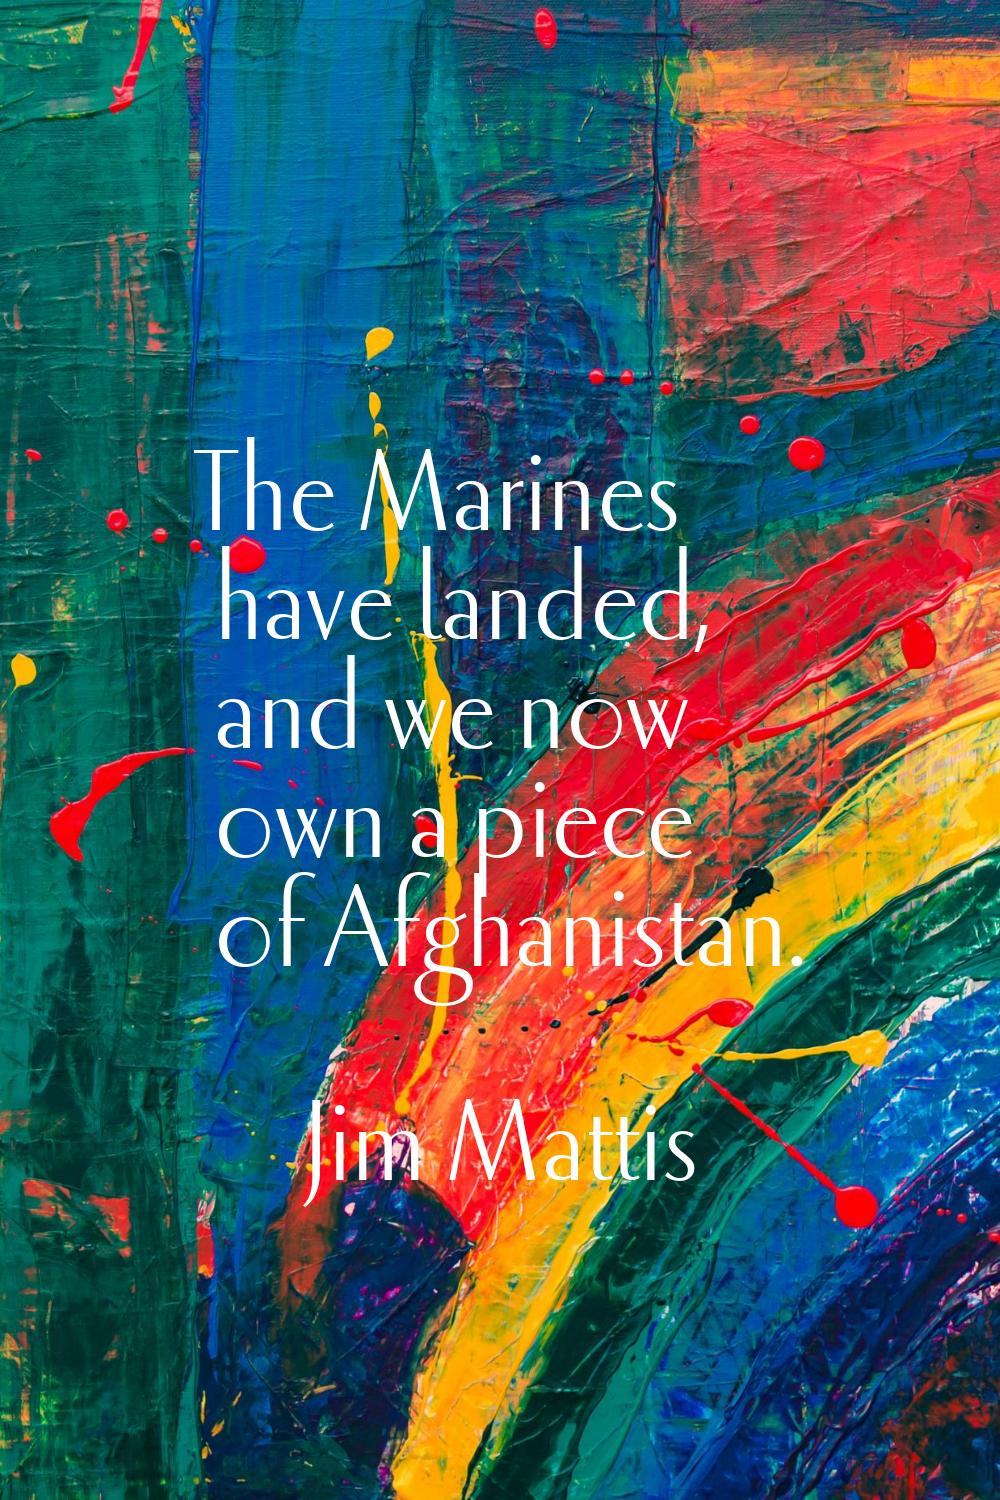 The Marines have landed, and we now own a piece of Afghanistan.